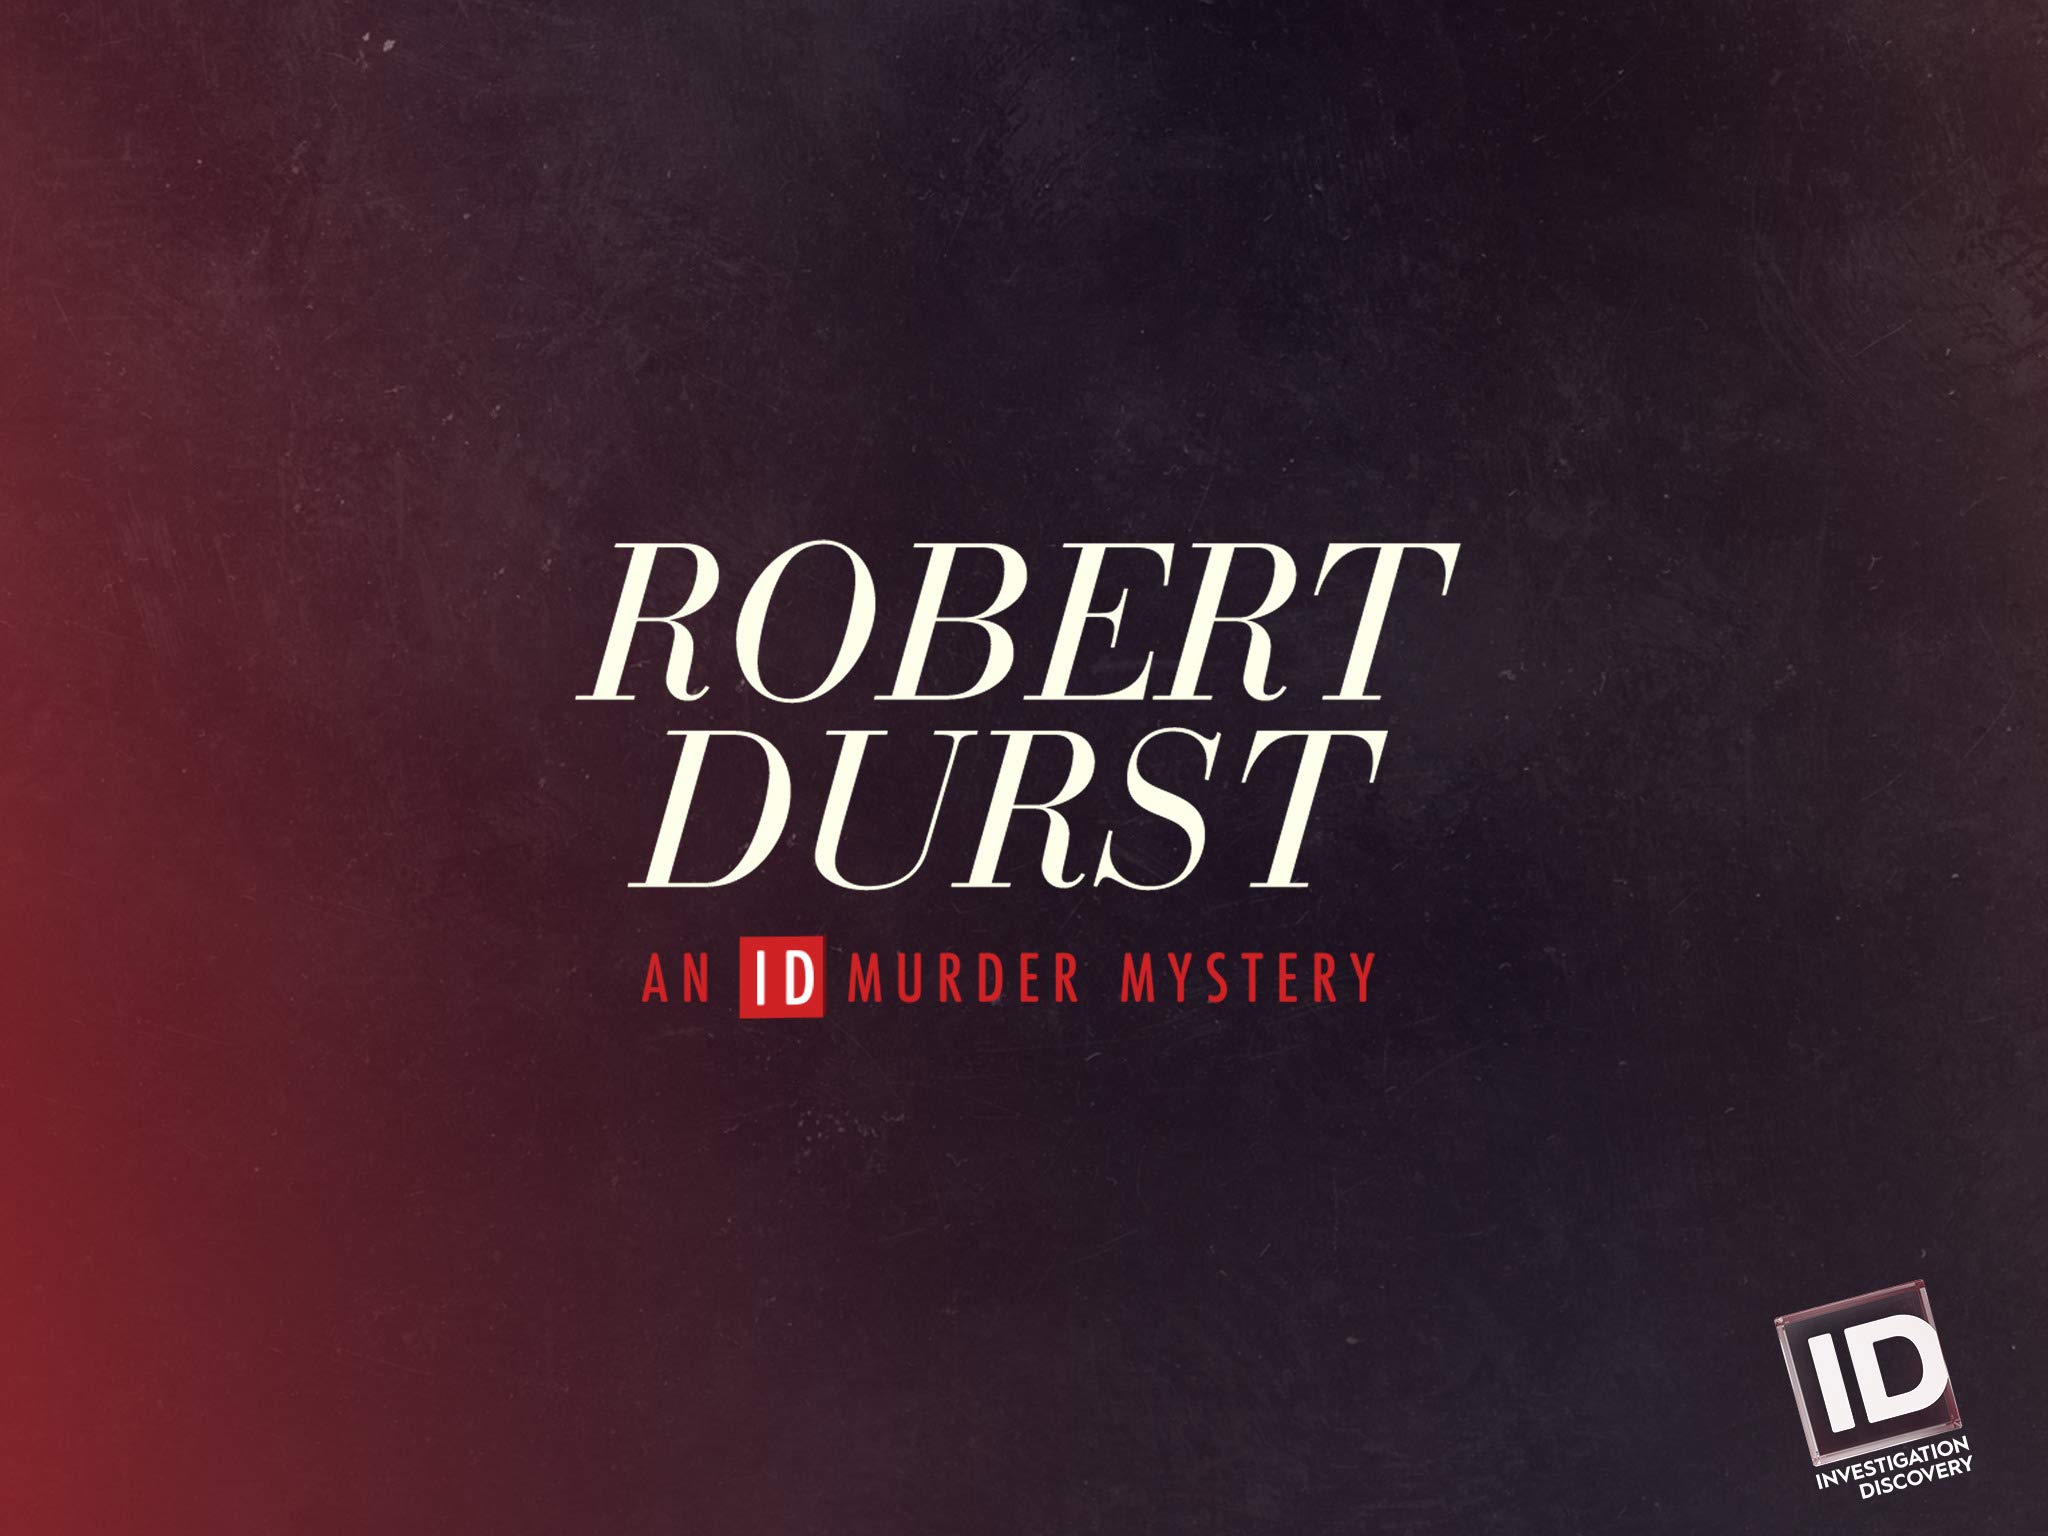 TV ratings for Robert Durst: An Id Murder Mystery in Thailand. investigation discovery TV series